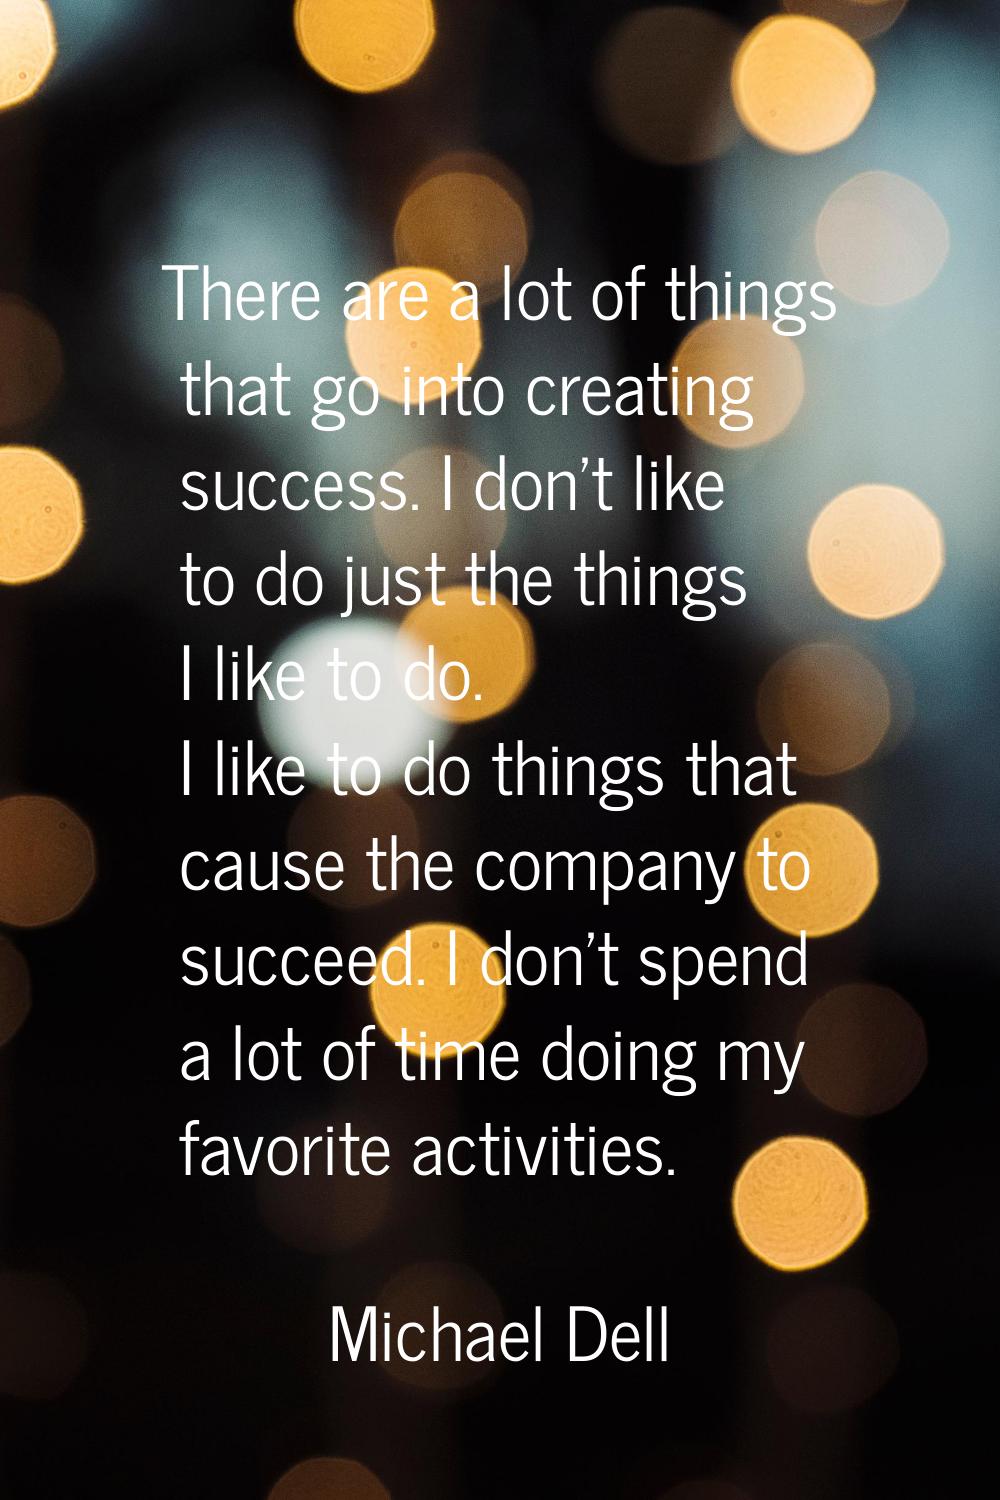 There are a lot of things that go into creating success. I don't like to do just the things I like 